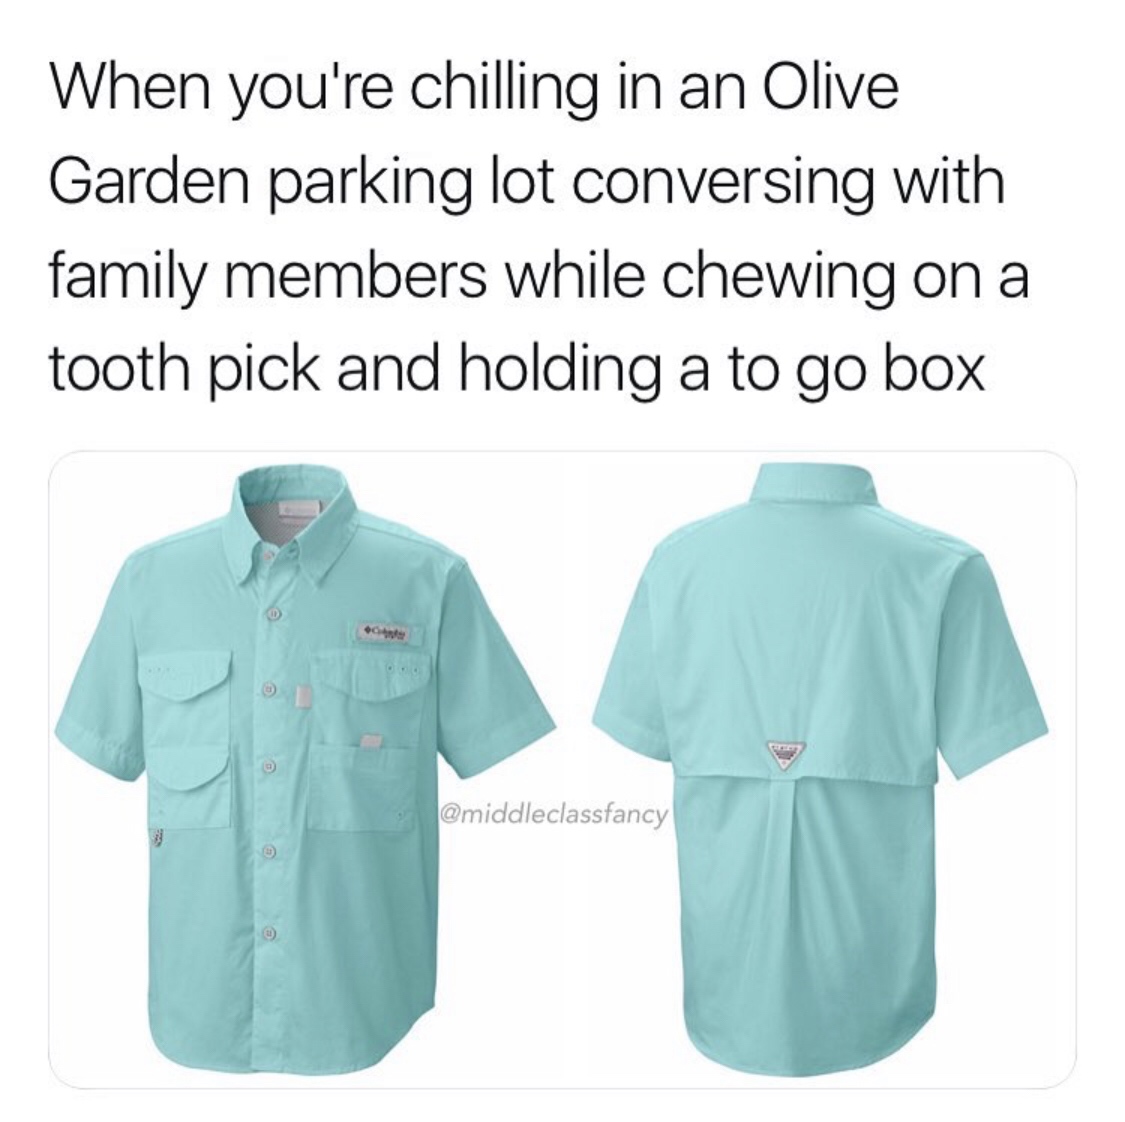 sleeve - When you're chilling in an Olive Garden parking lot conversing with family members while chewing on a tooth pick and holding a to go box